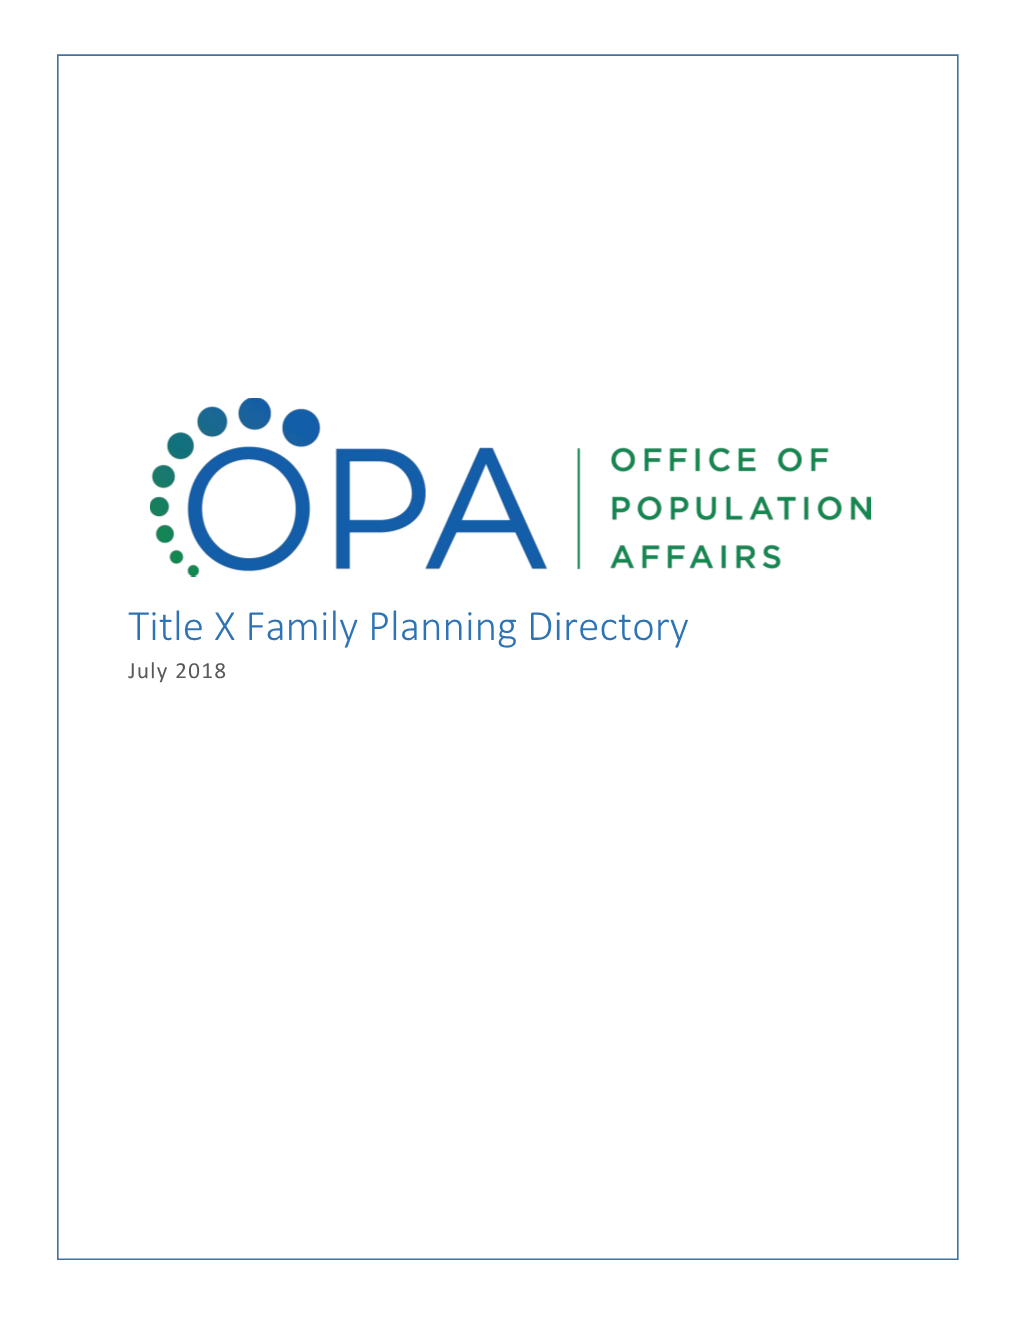 Title X Family Planning Directory—July 2018